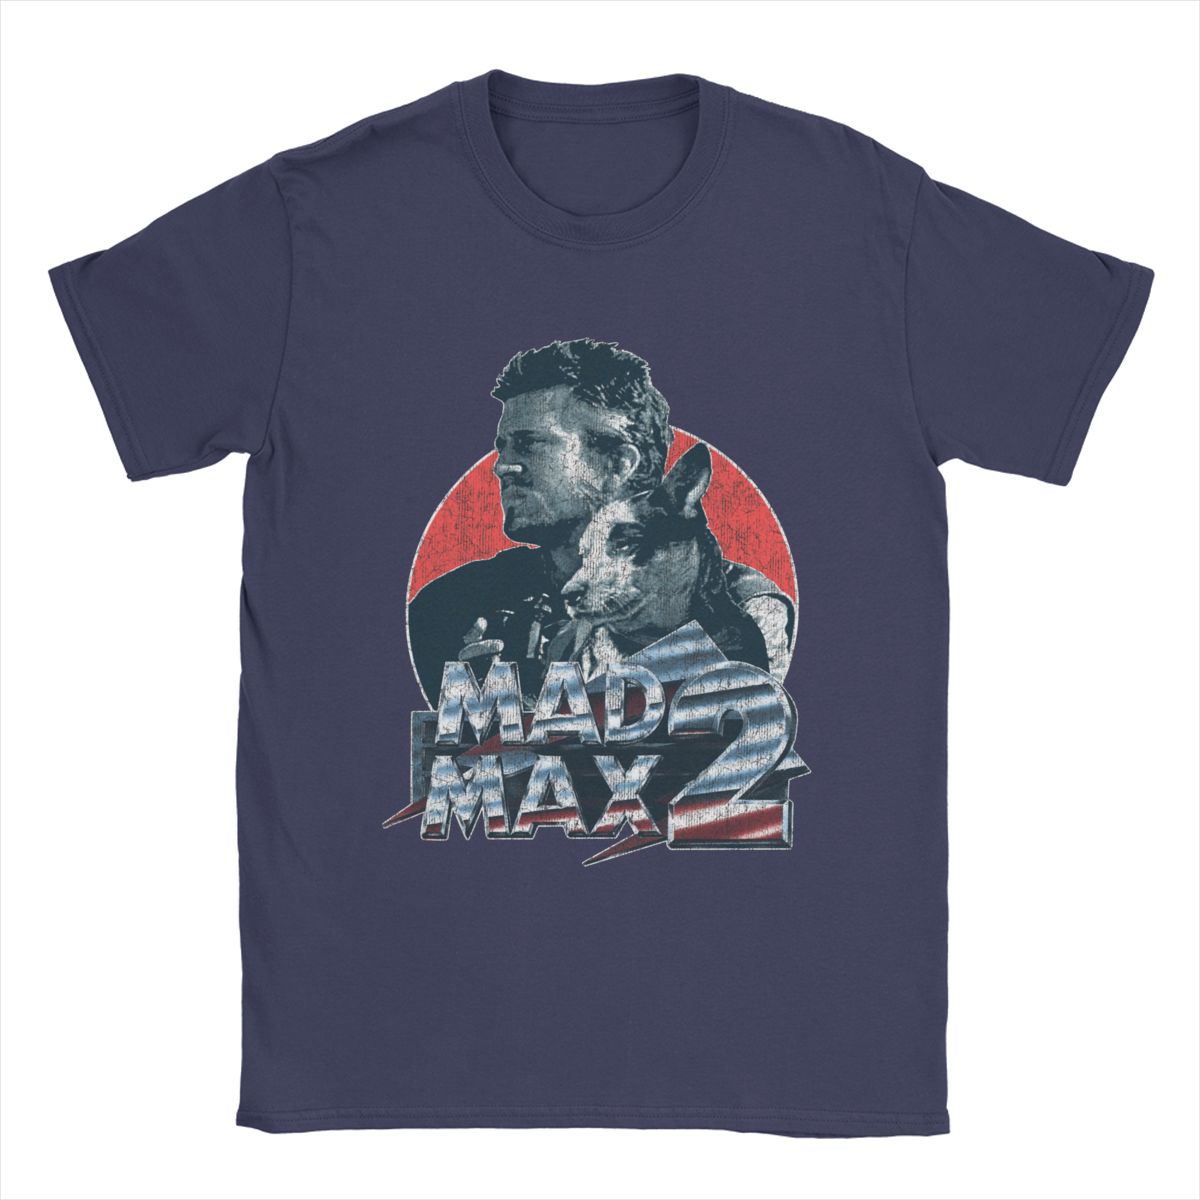 Mad Max - T-Shirt 100% Cotton - Classic 1980's Action - Movie Buff Fanwear-Navy Blue-S-